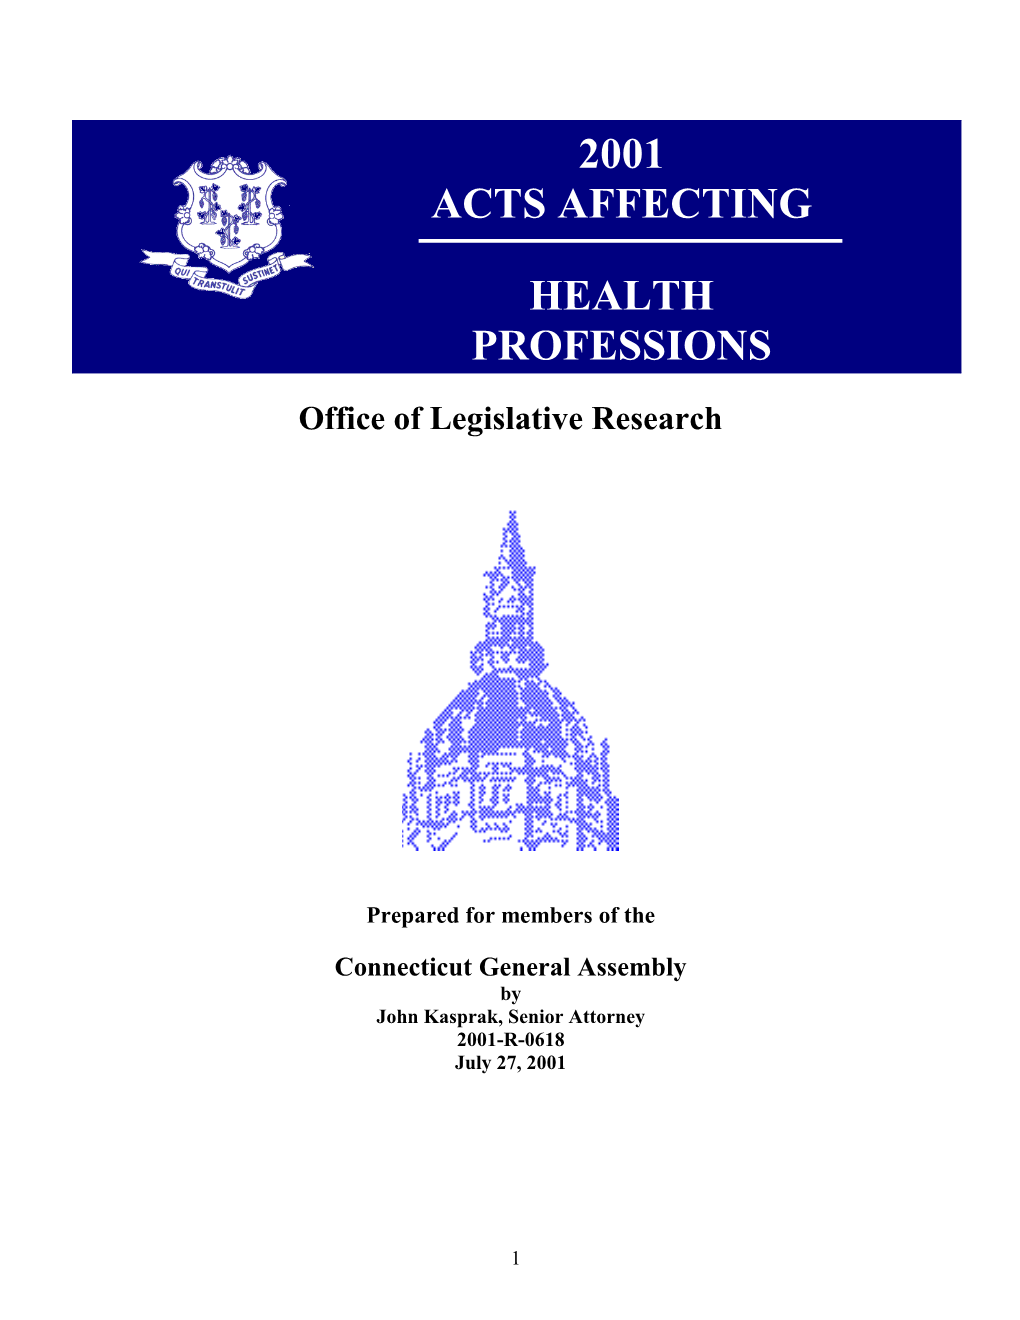 Act Affecting Health Profession